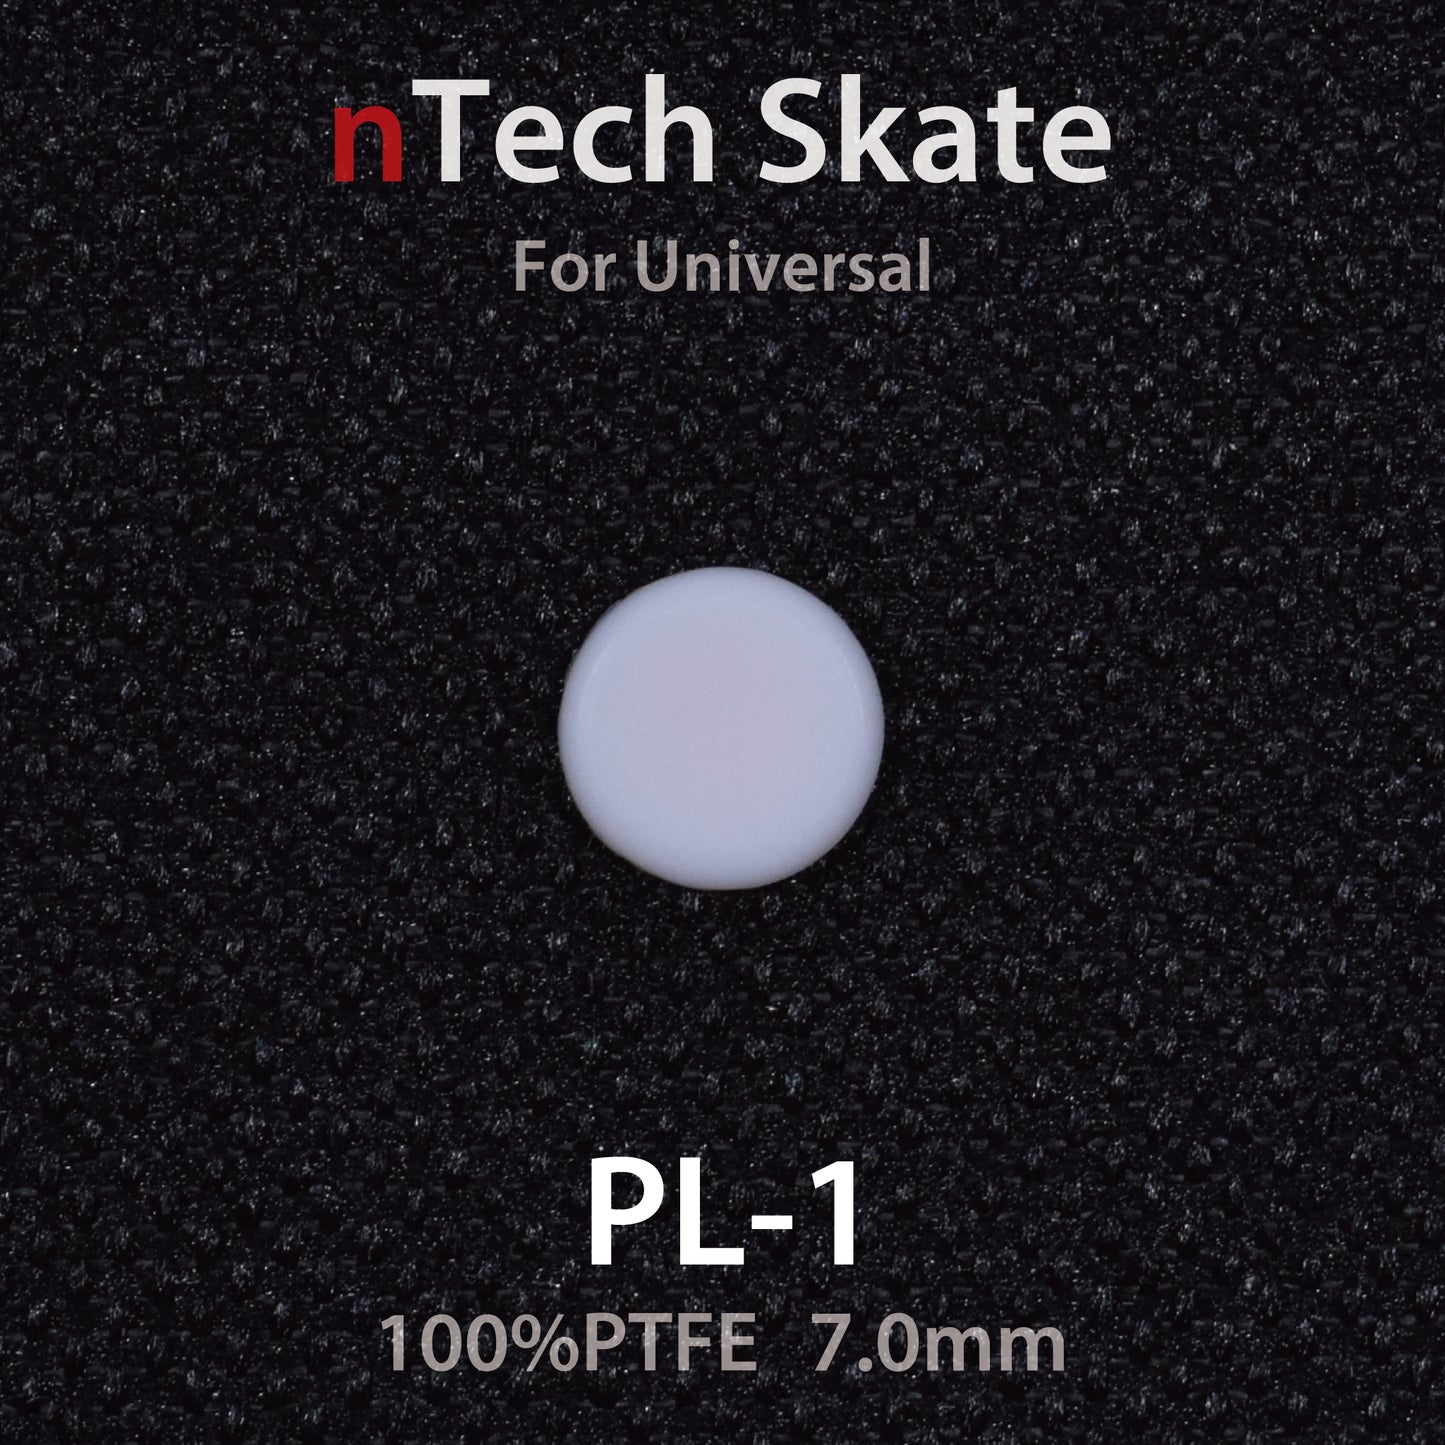 nTech Skate for Universal PL-1 / DR-1 / Abyss